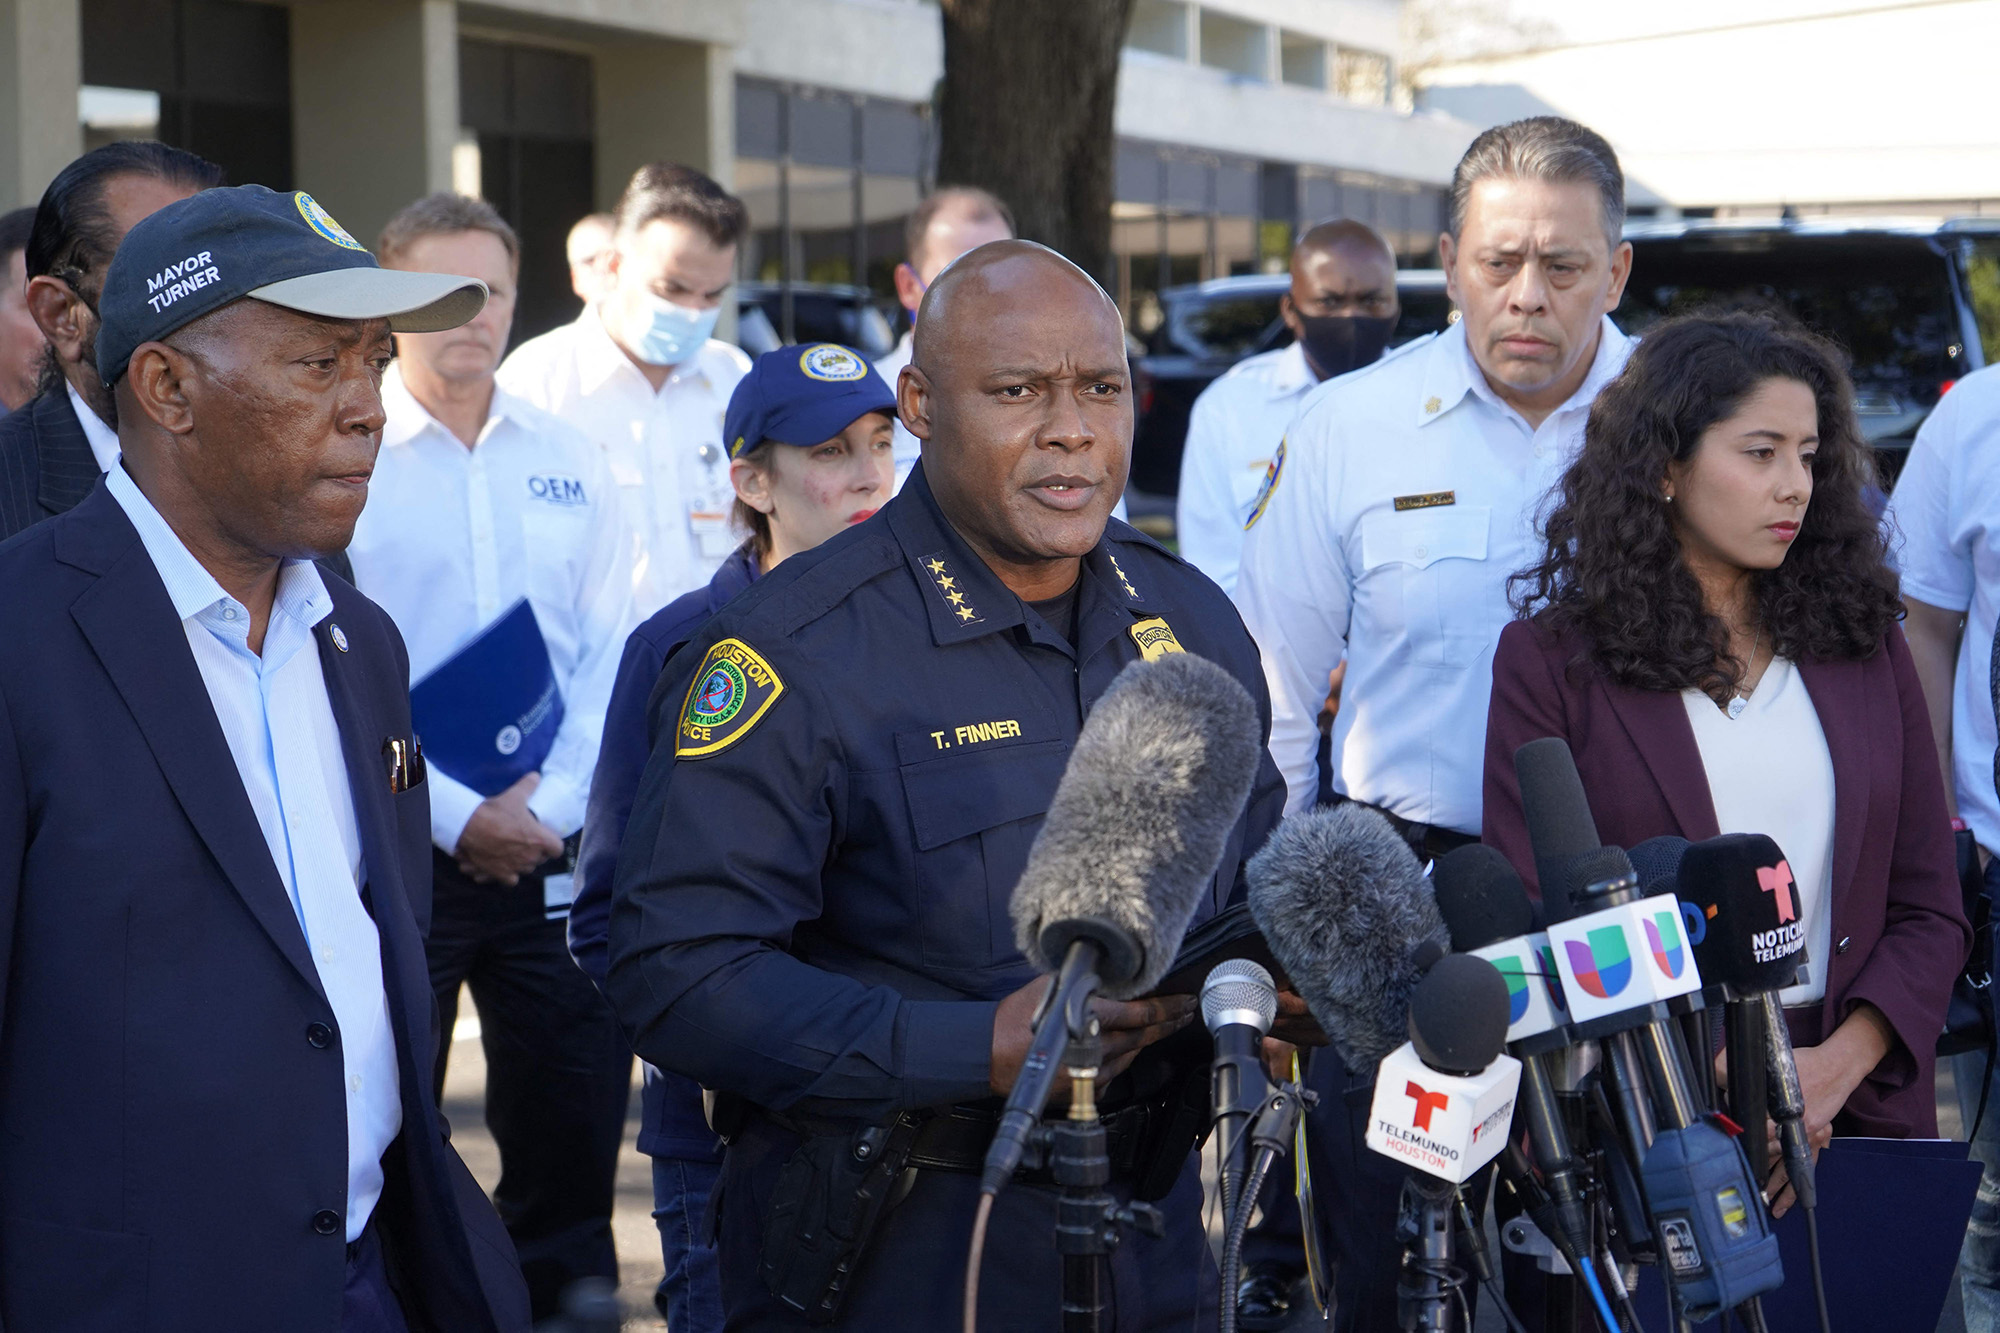 Houston police chief Troy Finner speaks after a concert accident killed 8 people at Travis Scott's Astroworld festival.